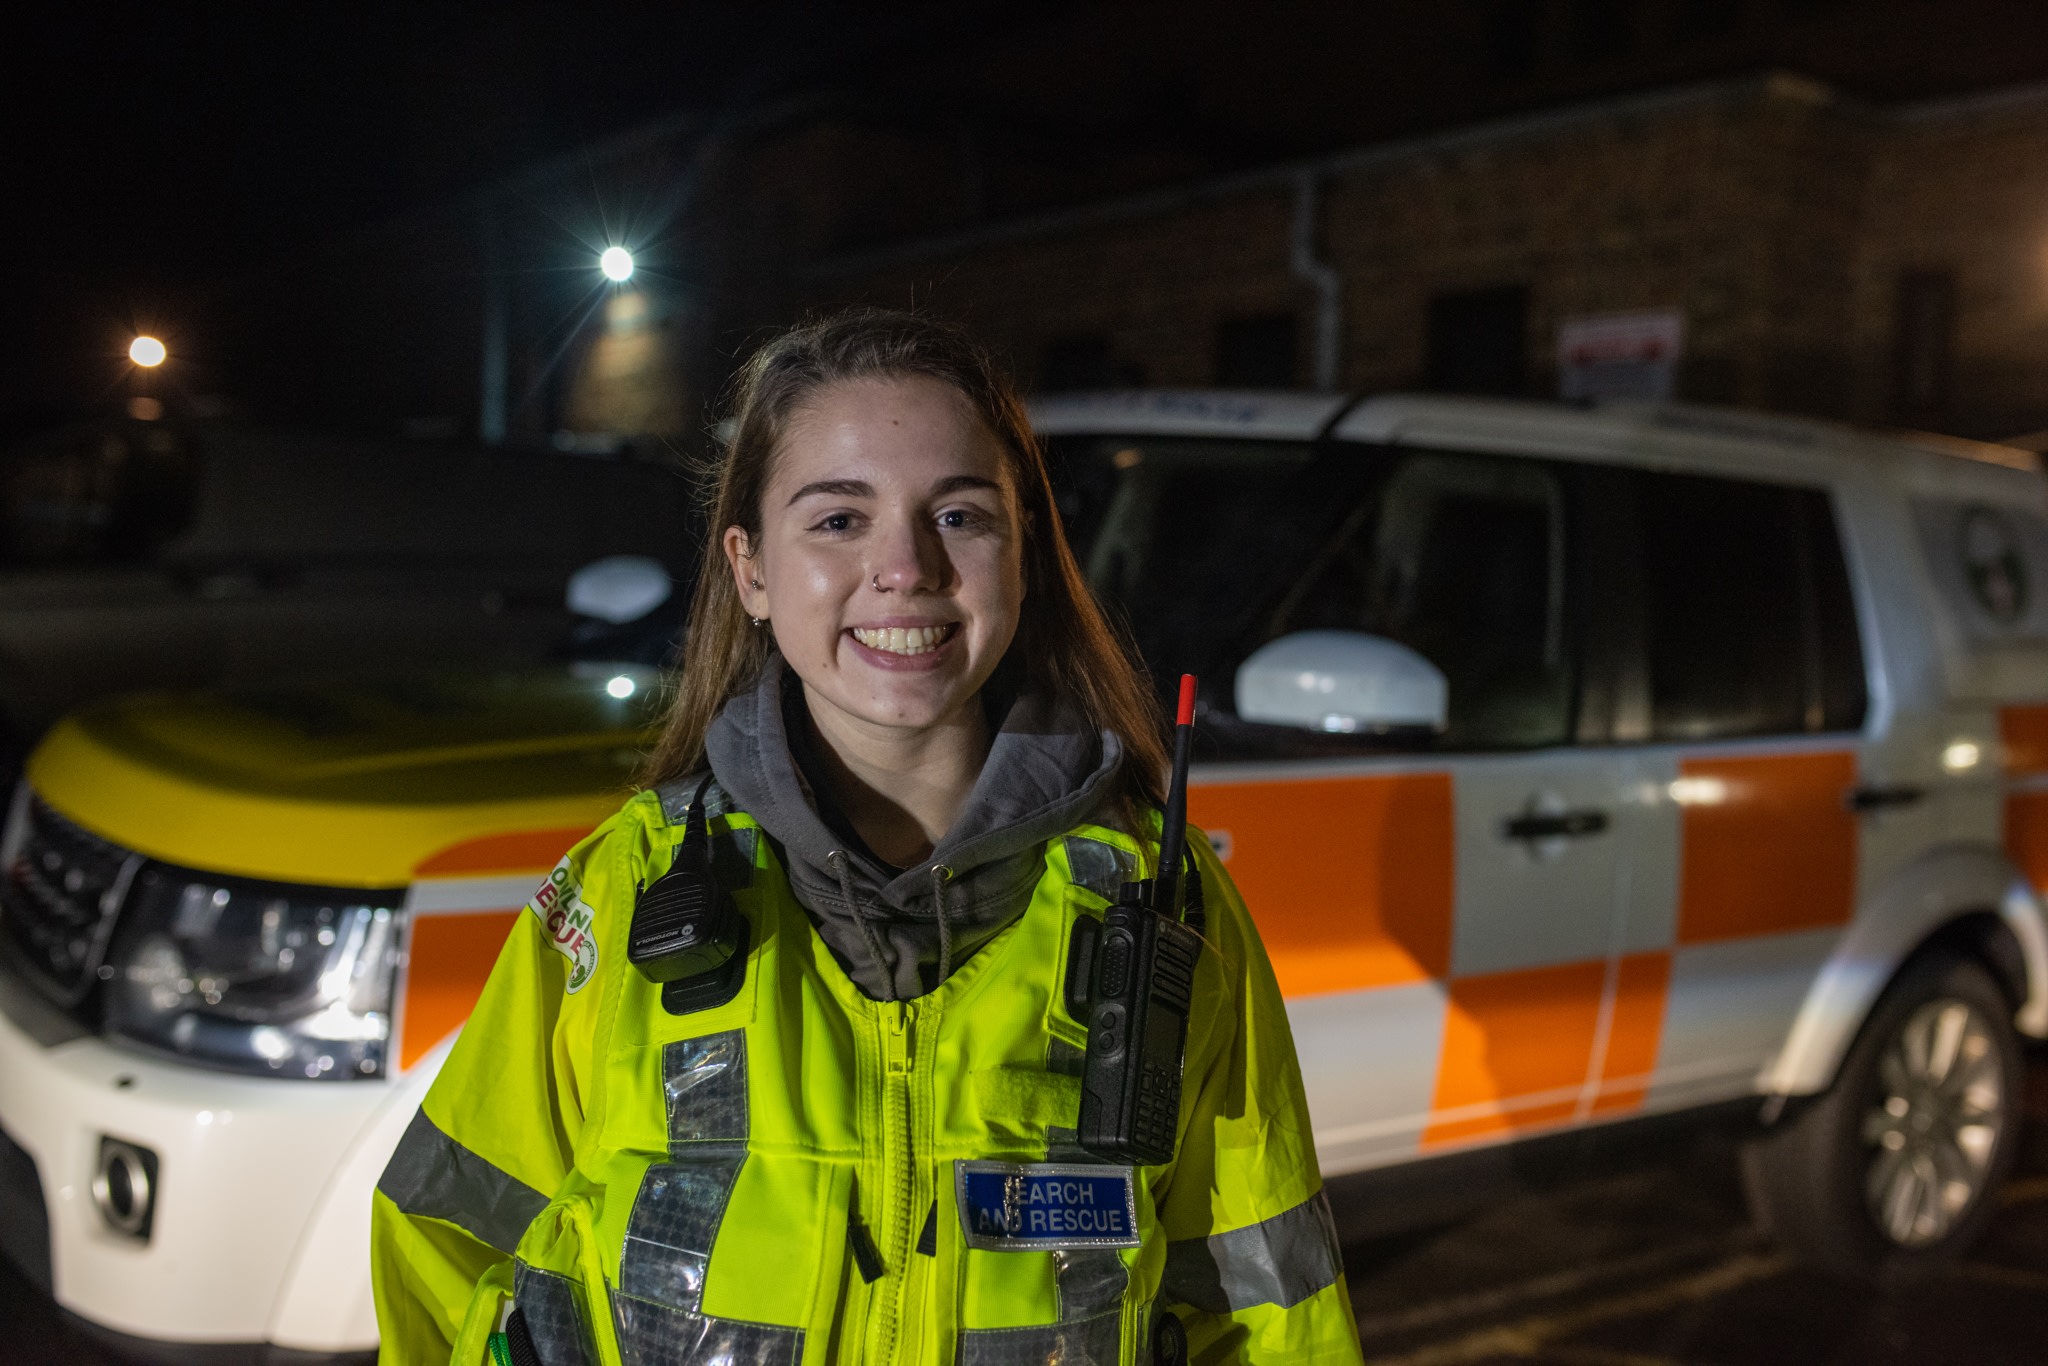 Zoe Webber - Search and Rescue - Bold Girl - Burgess Hill Girls